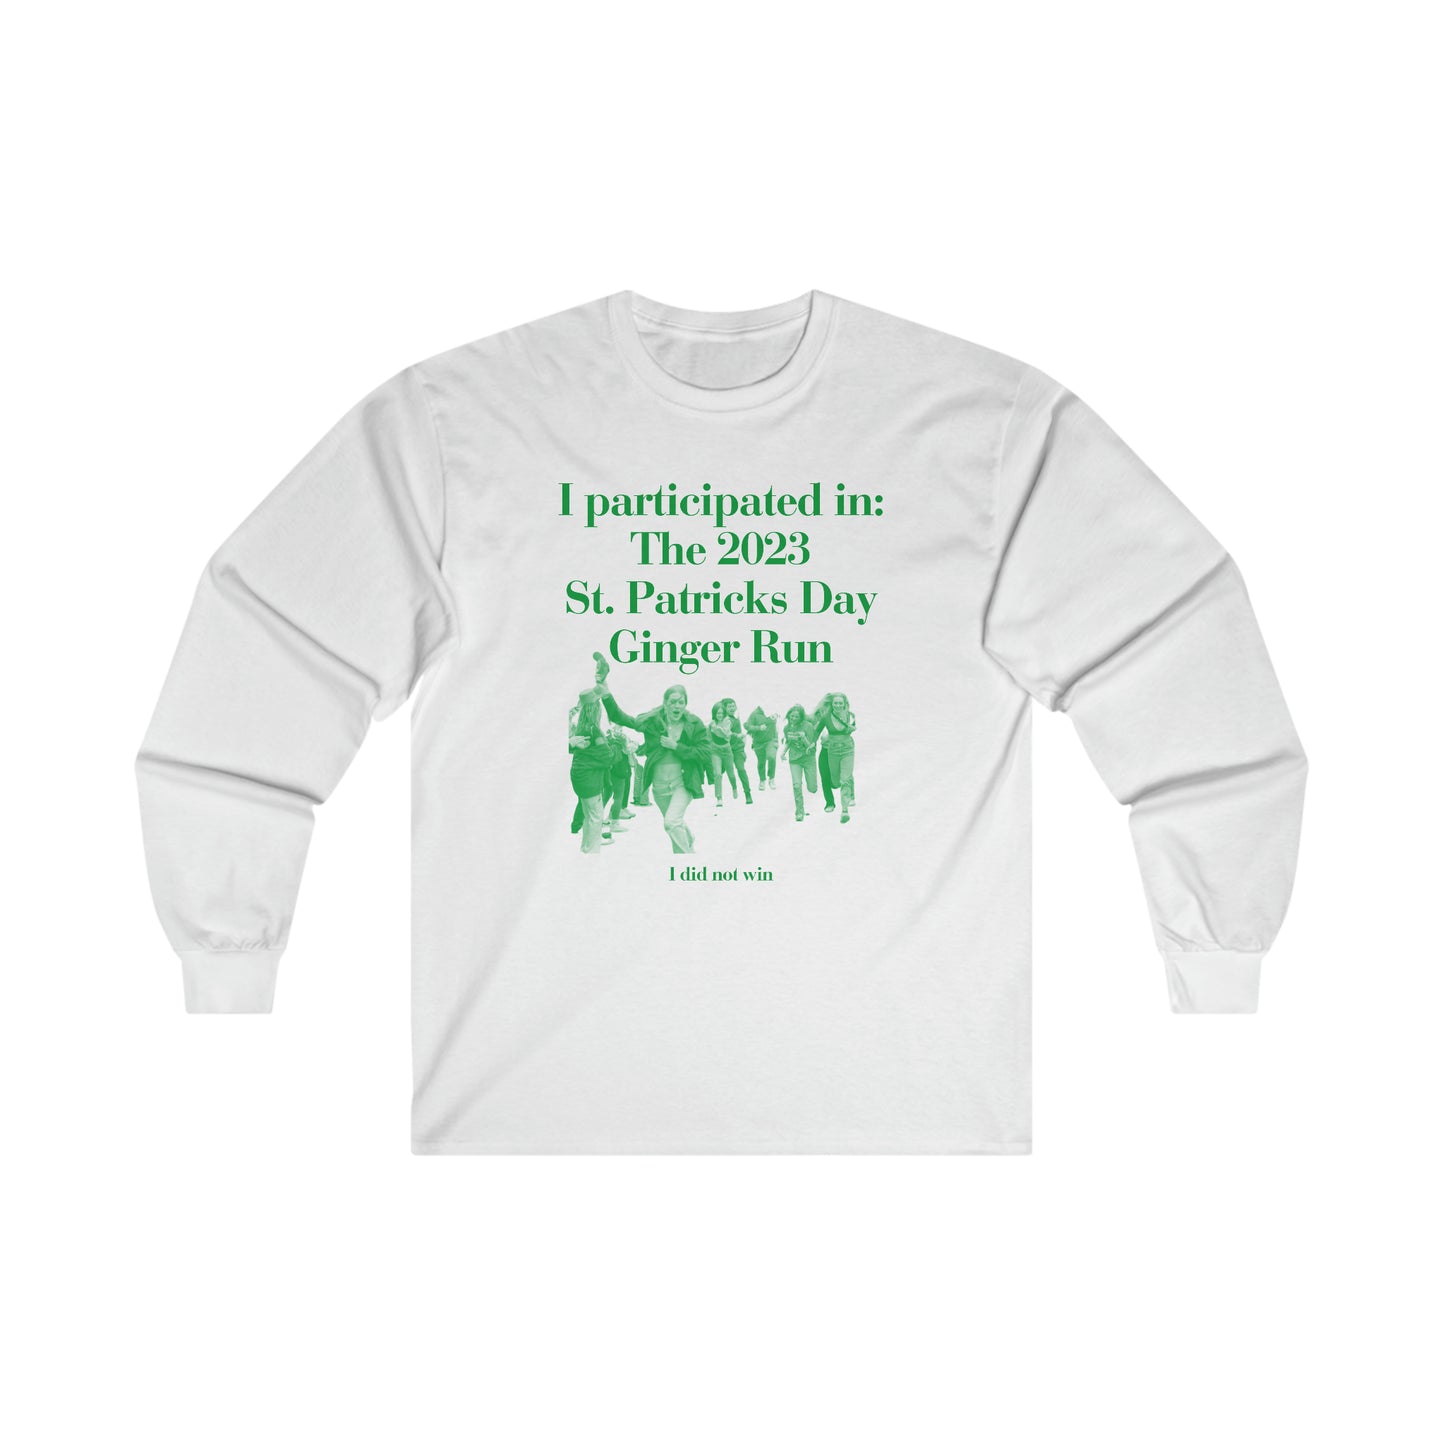 I participated in the 2023 St. Patricks Day Ginger Run - Ultra Cotton Long Sleeve Tee